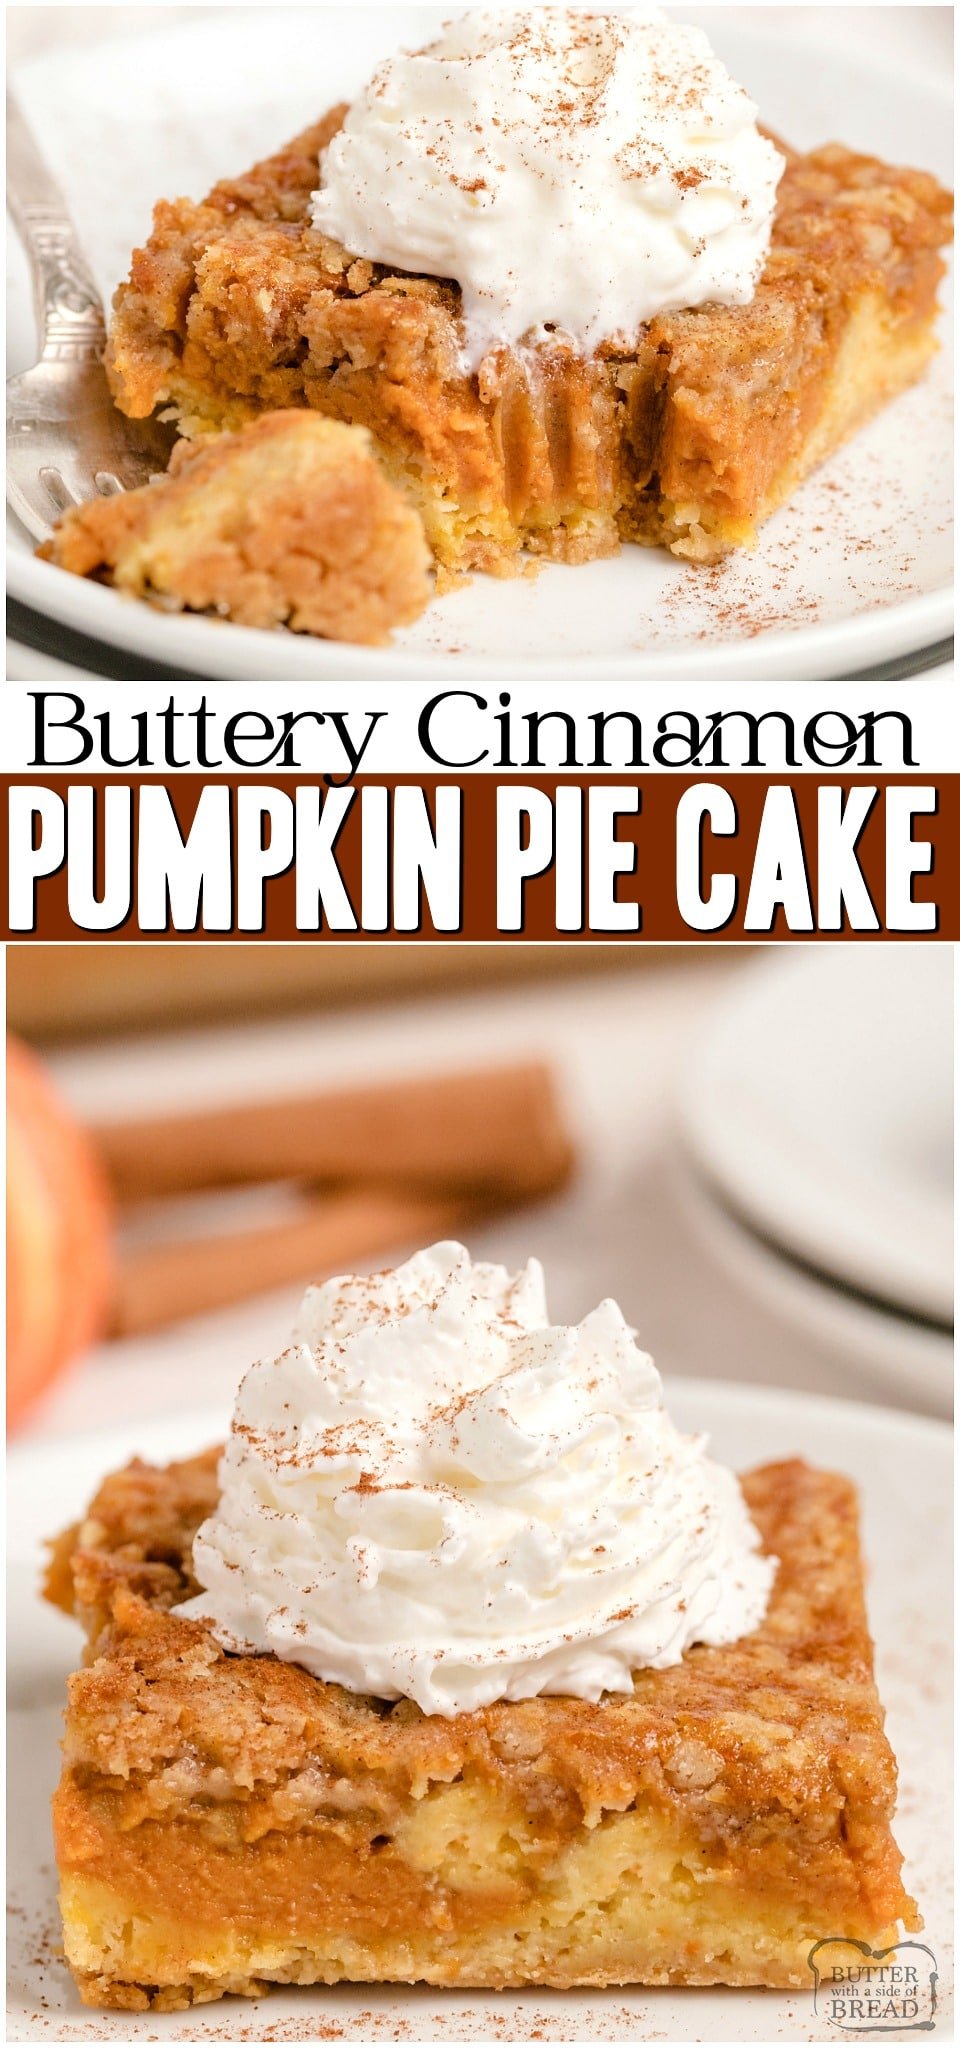 Pumpkin Pie Cake is festive Fall dessert made with a cake mix & pumpkin. Easy layered pumpkin cake that comes together fast and is a family favorite!